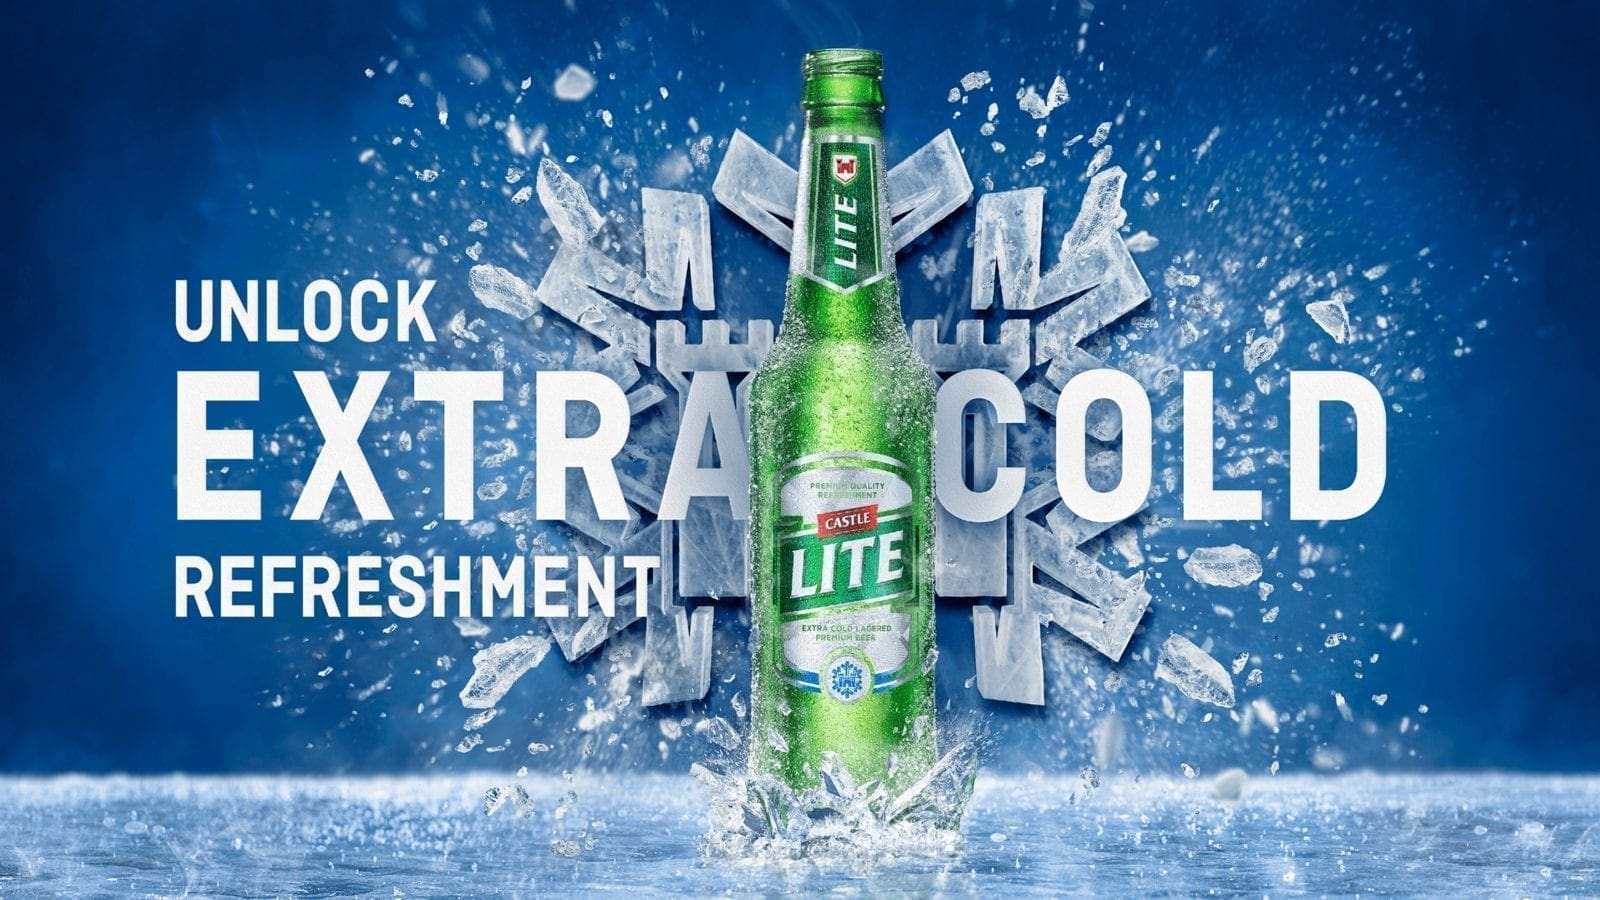 Tanzania Breweries’ Castle Lite features as the only African brand to win Creative X Awards by AB InBev